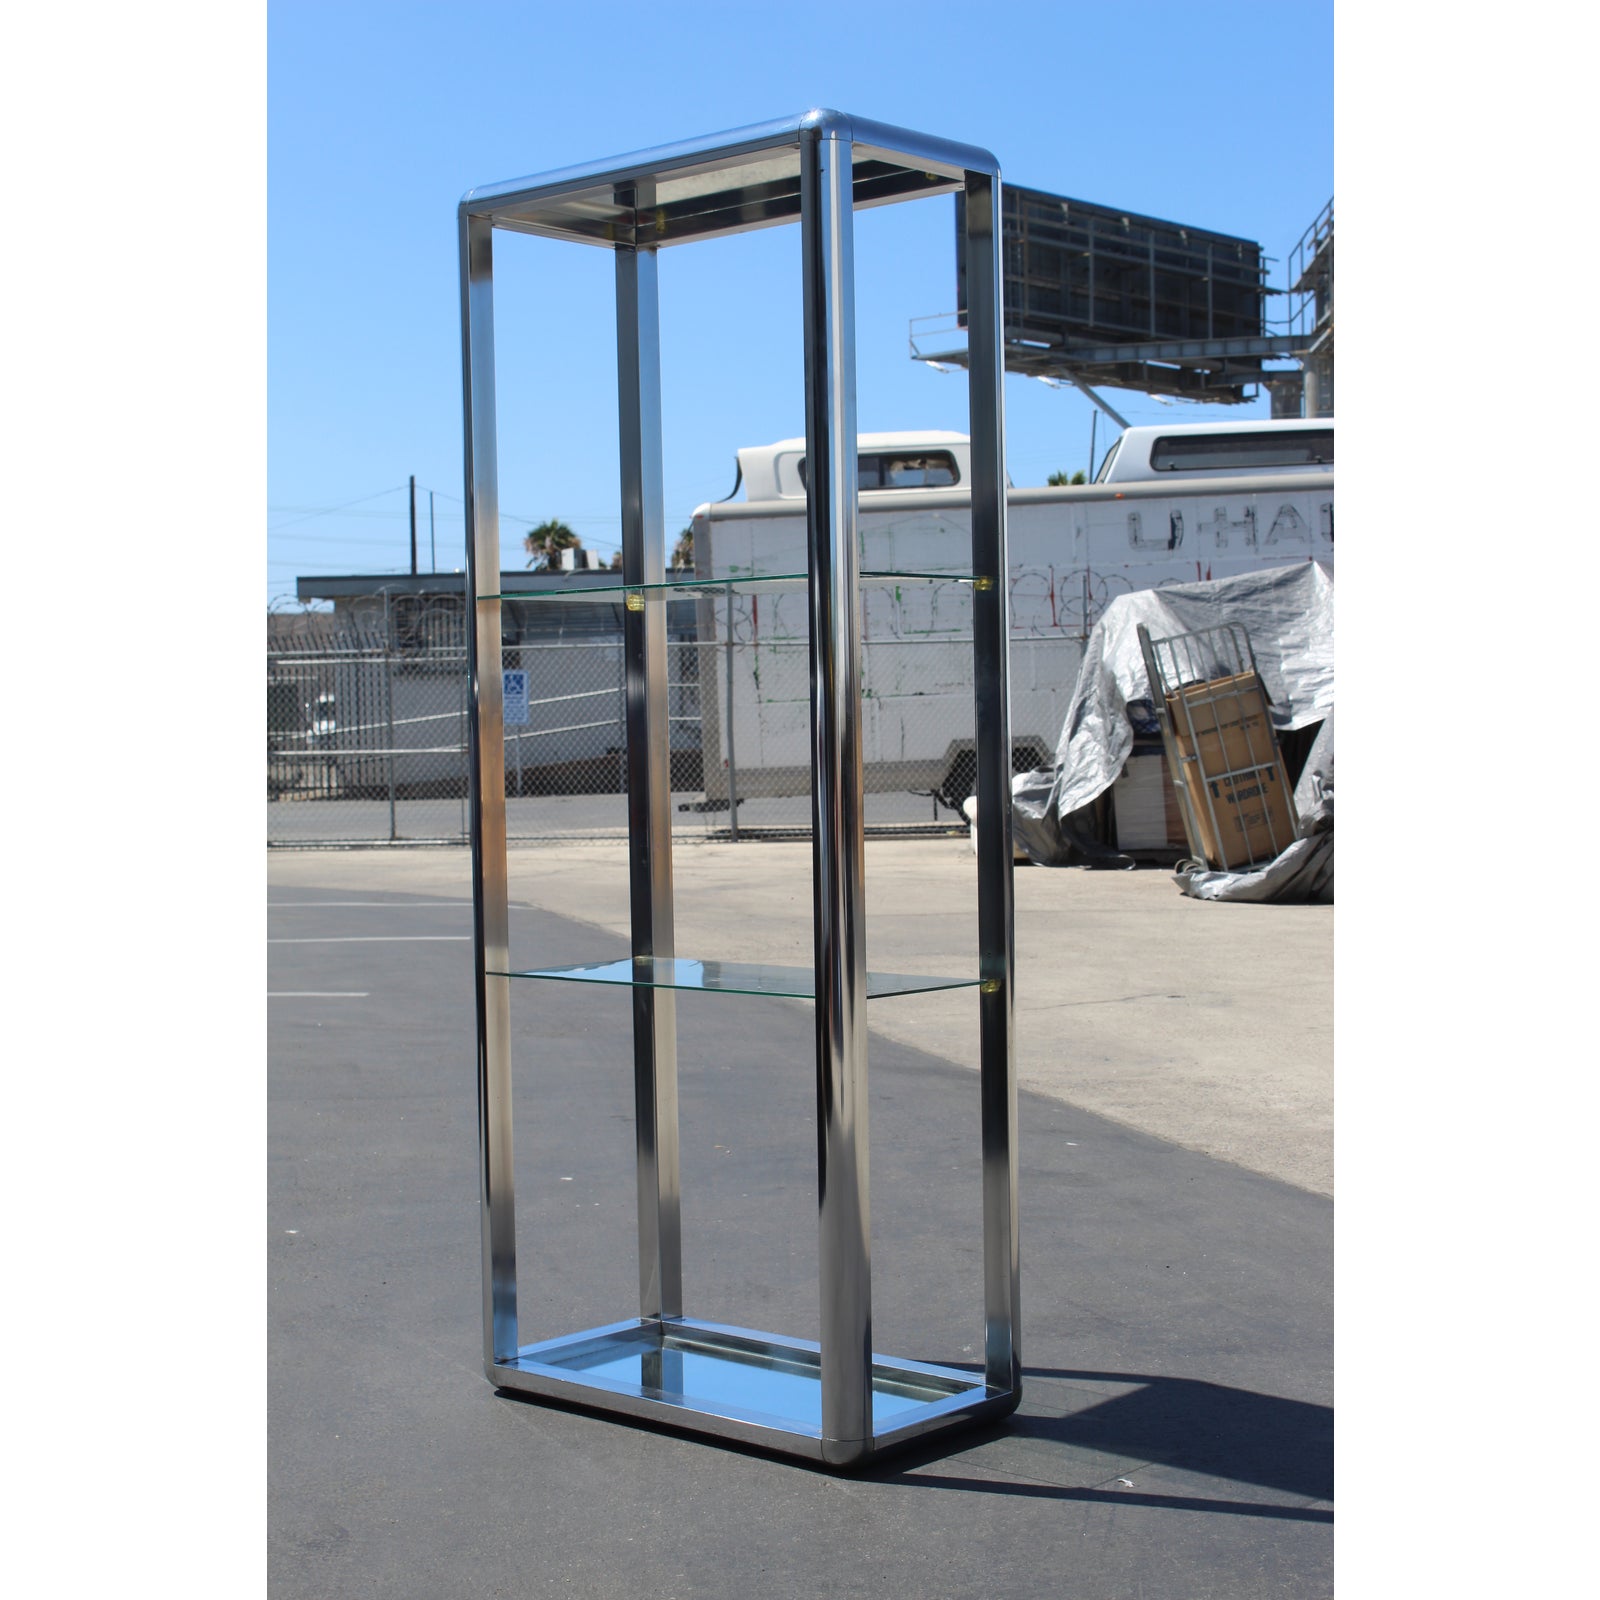 1970s-chrome-mirrored-display-case-stand-6833